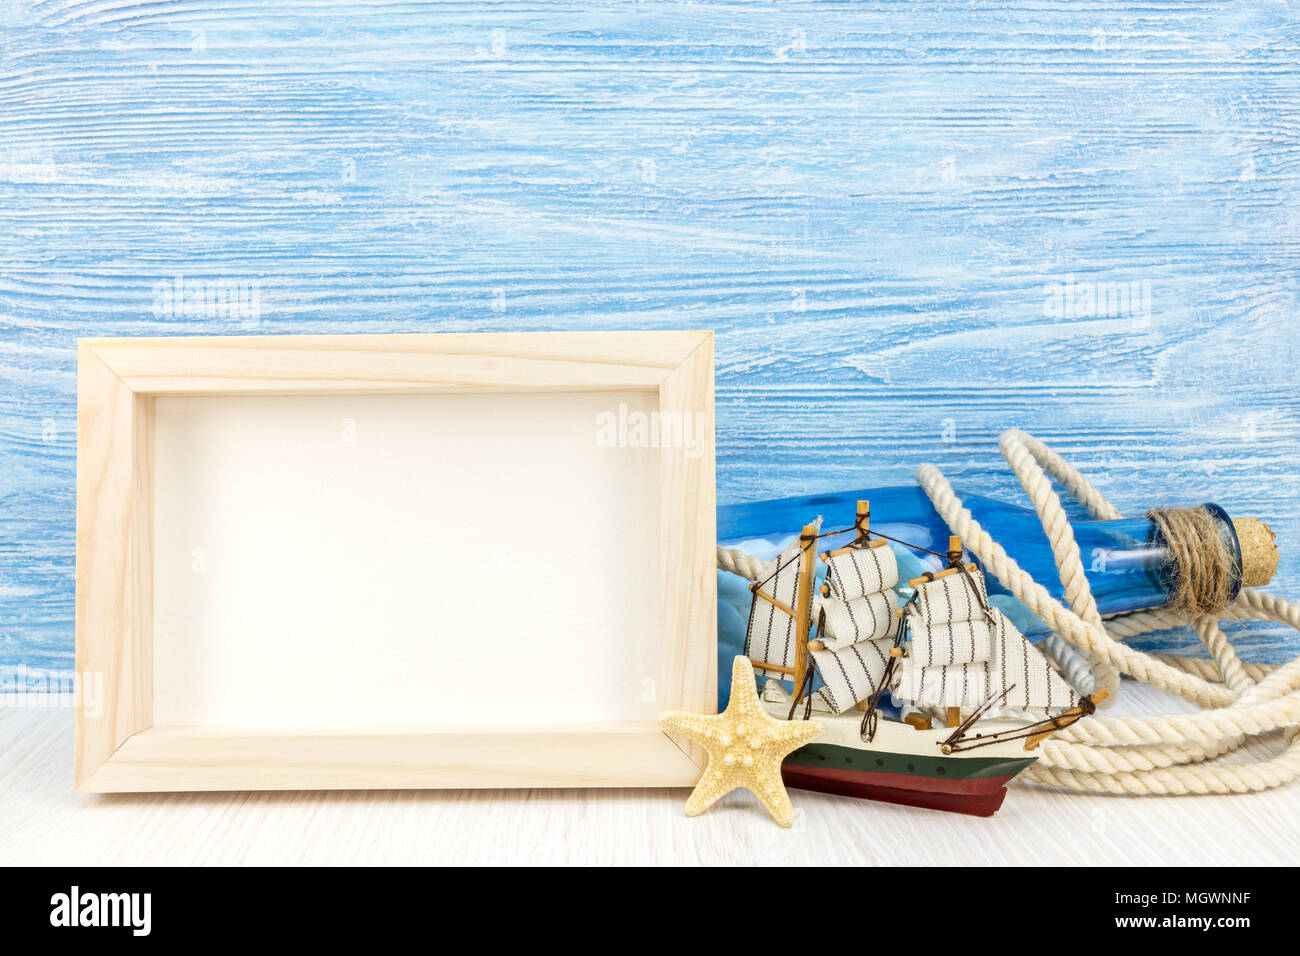 summer travel background with photo frame, blue glass bottle, seashells, rope, starfish and ship Stock Photo